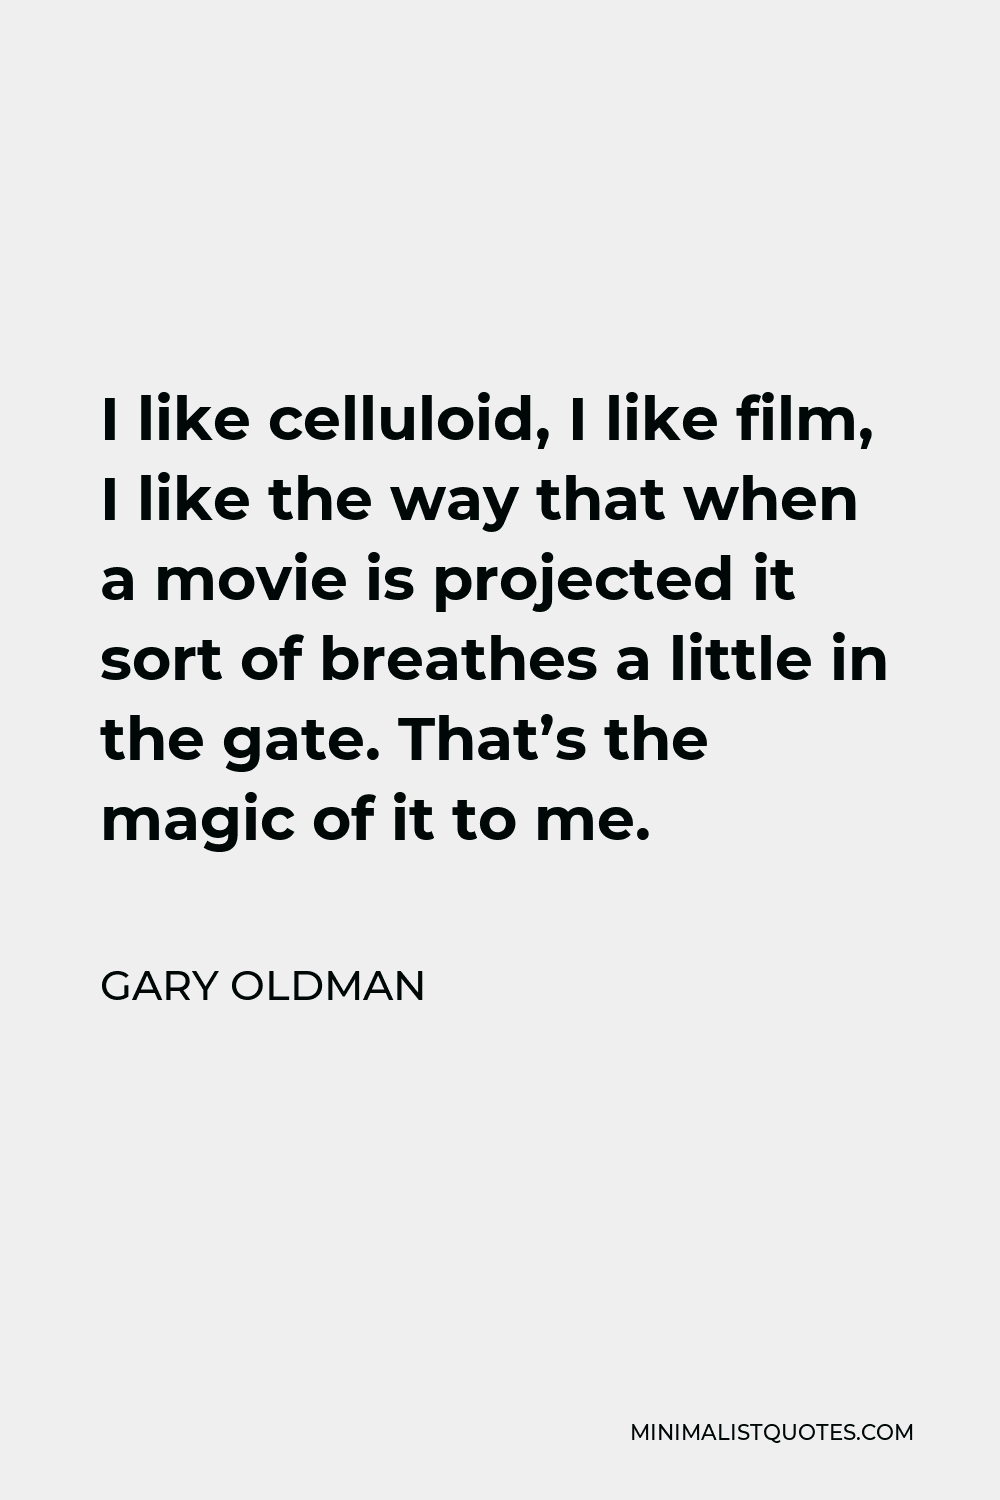 Gary Oldman Quote - I like celluloid, I like film, I like the way that when a movie is projected it sort of breathes a little in the gate. That’s the magic of it to me.